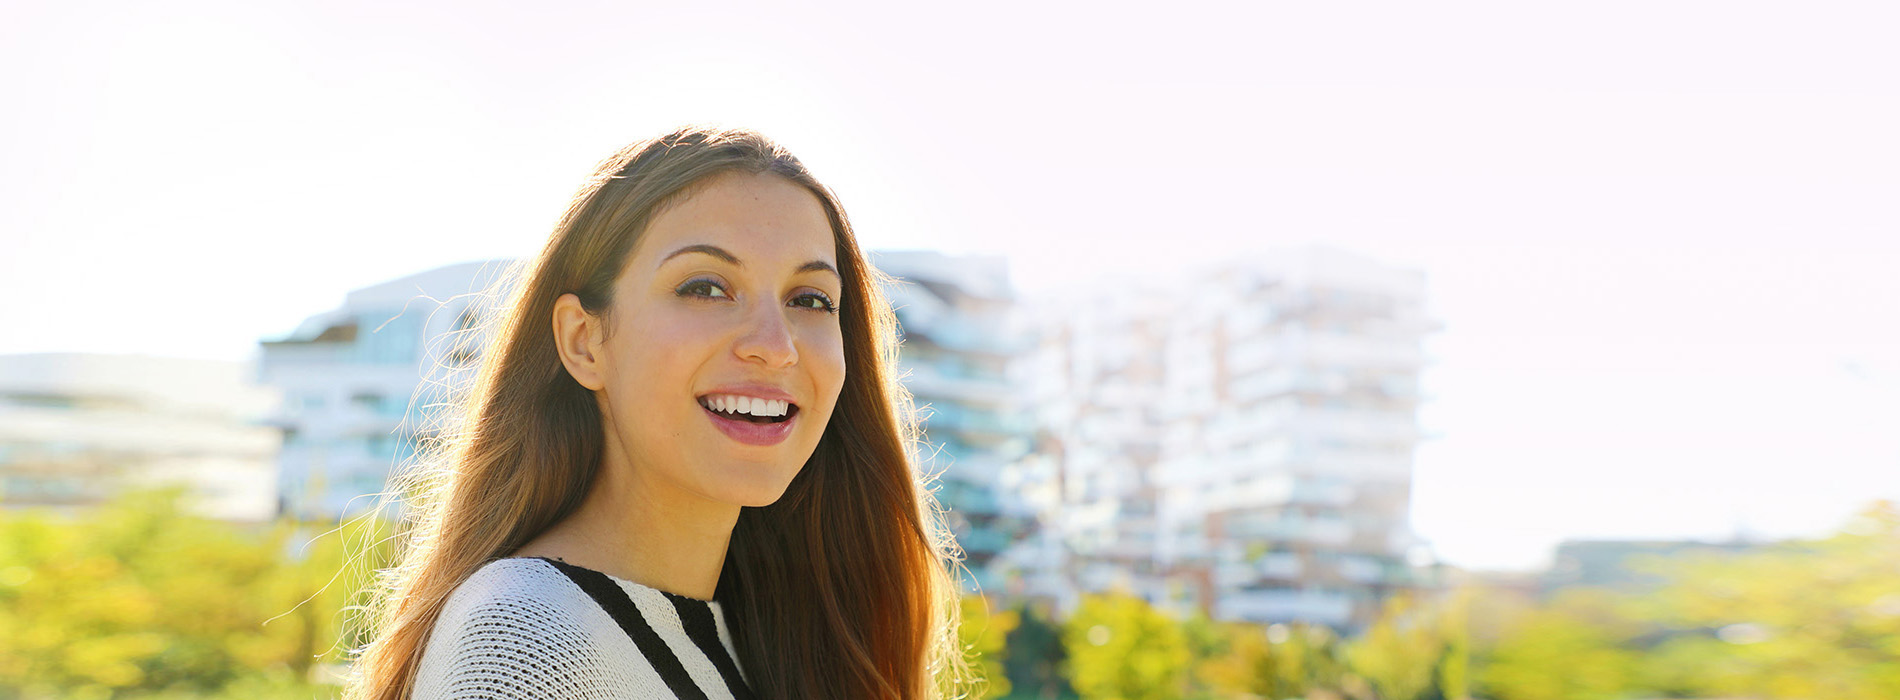 The image is a photograph of a young woman with long hair smiling at the camera, wearing a black and white striped top, against a blurred background that suggests an outdoor setting.